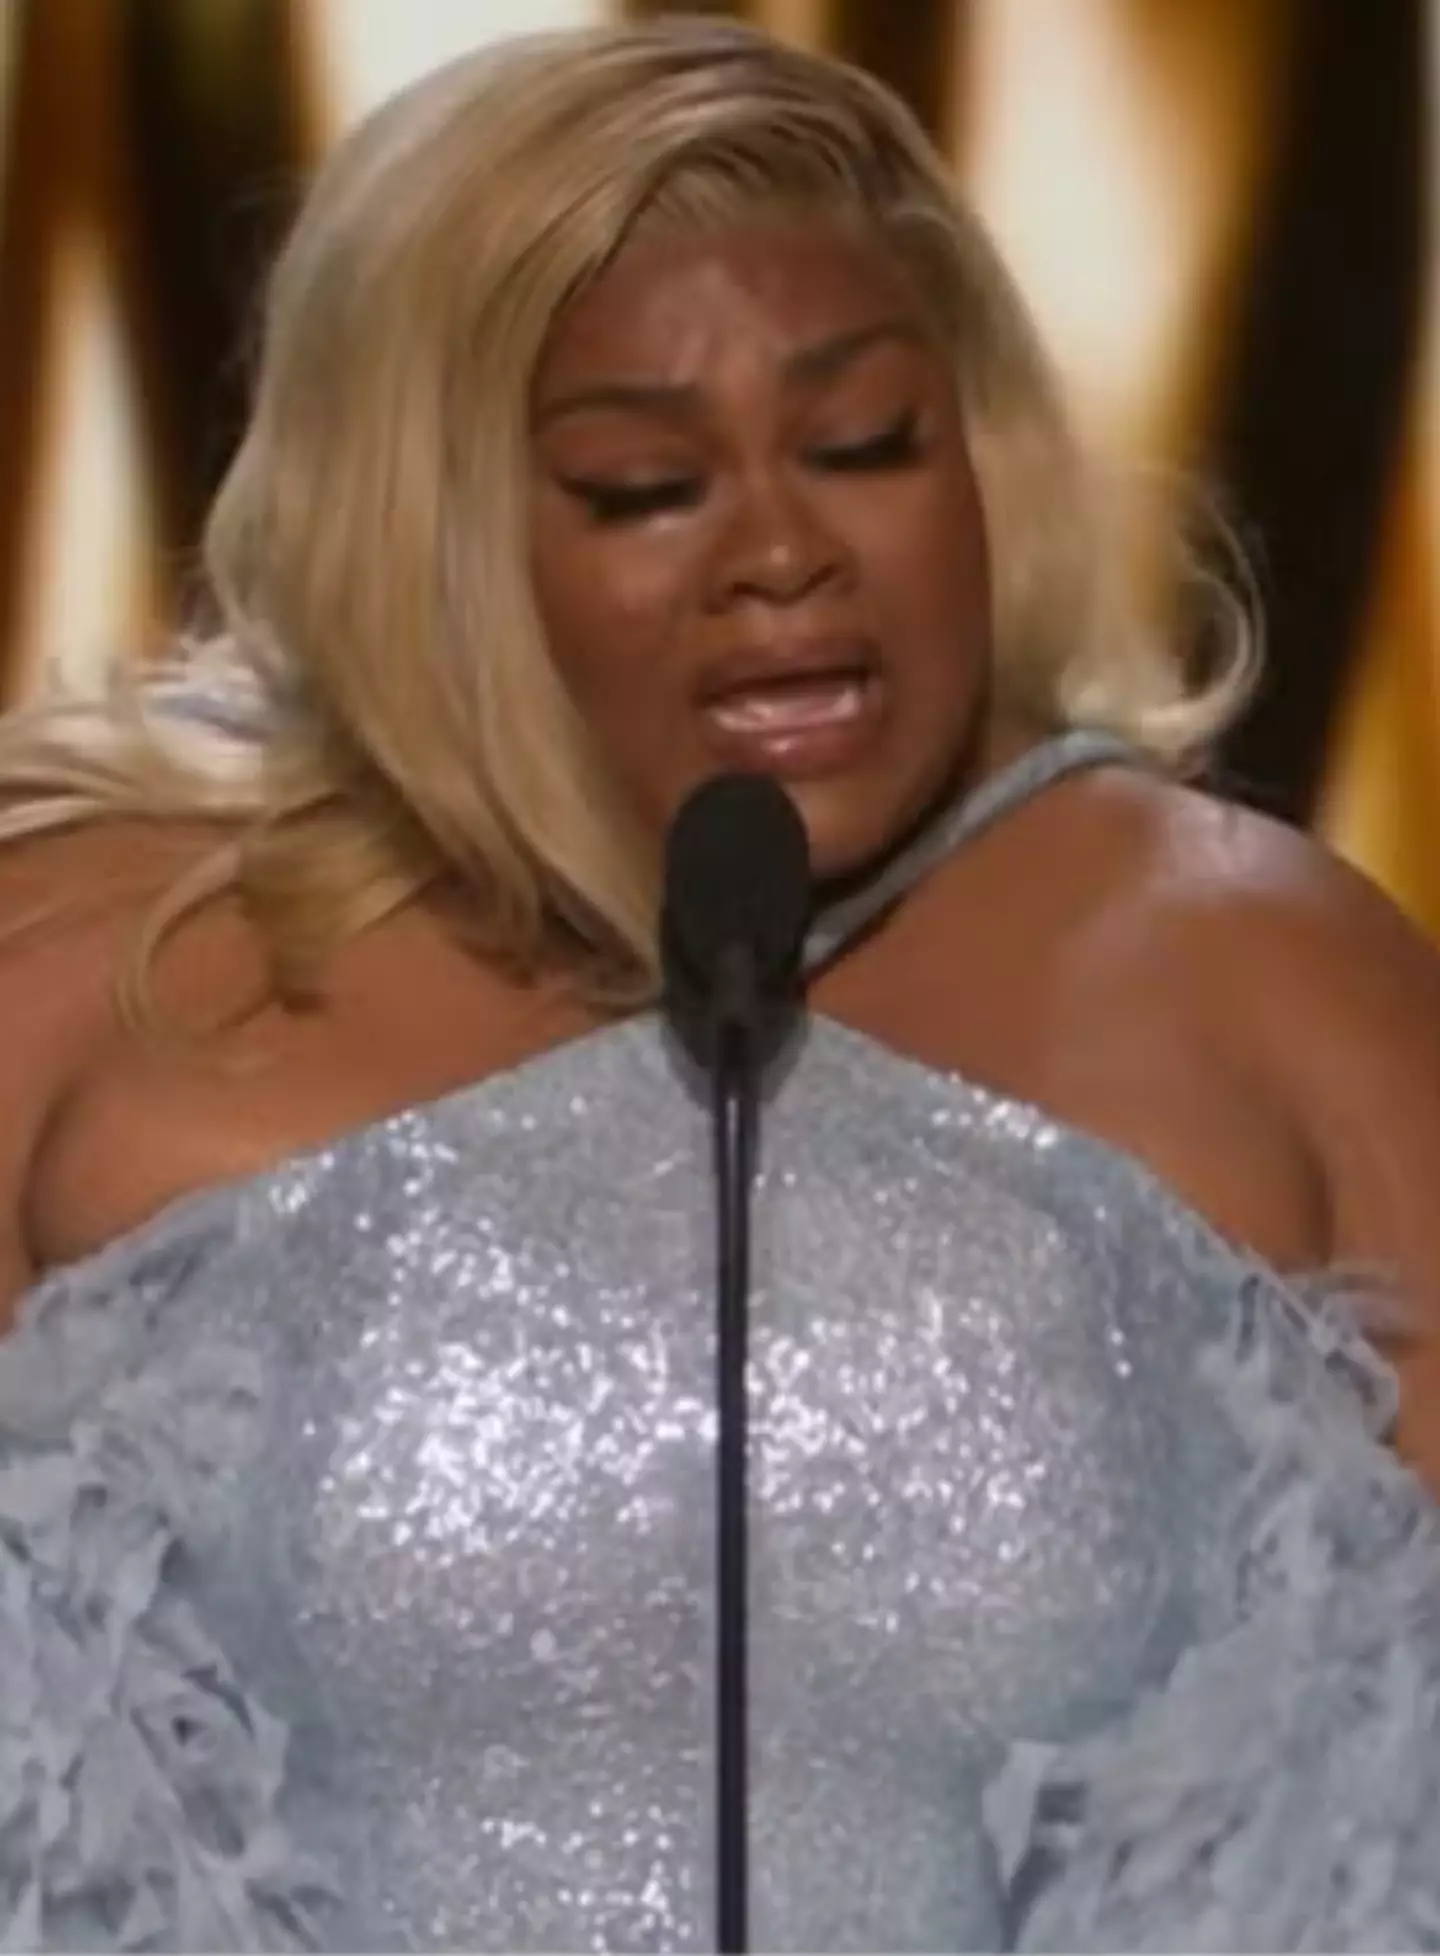 The actor tried to hold back tears while delivering her speech.